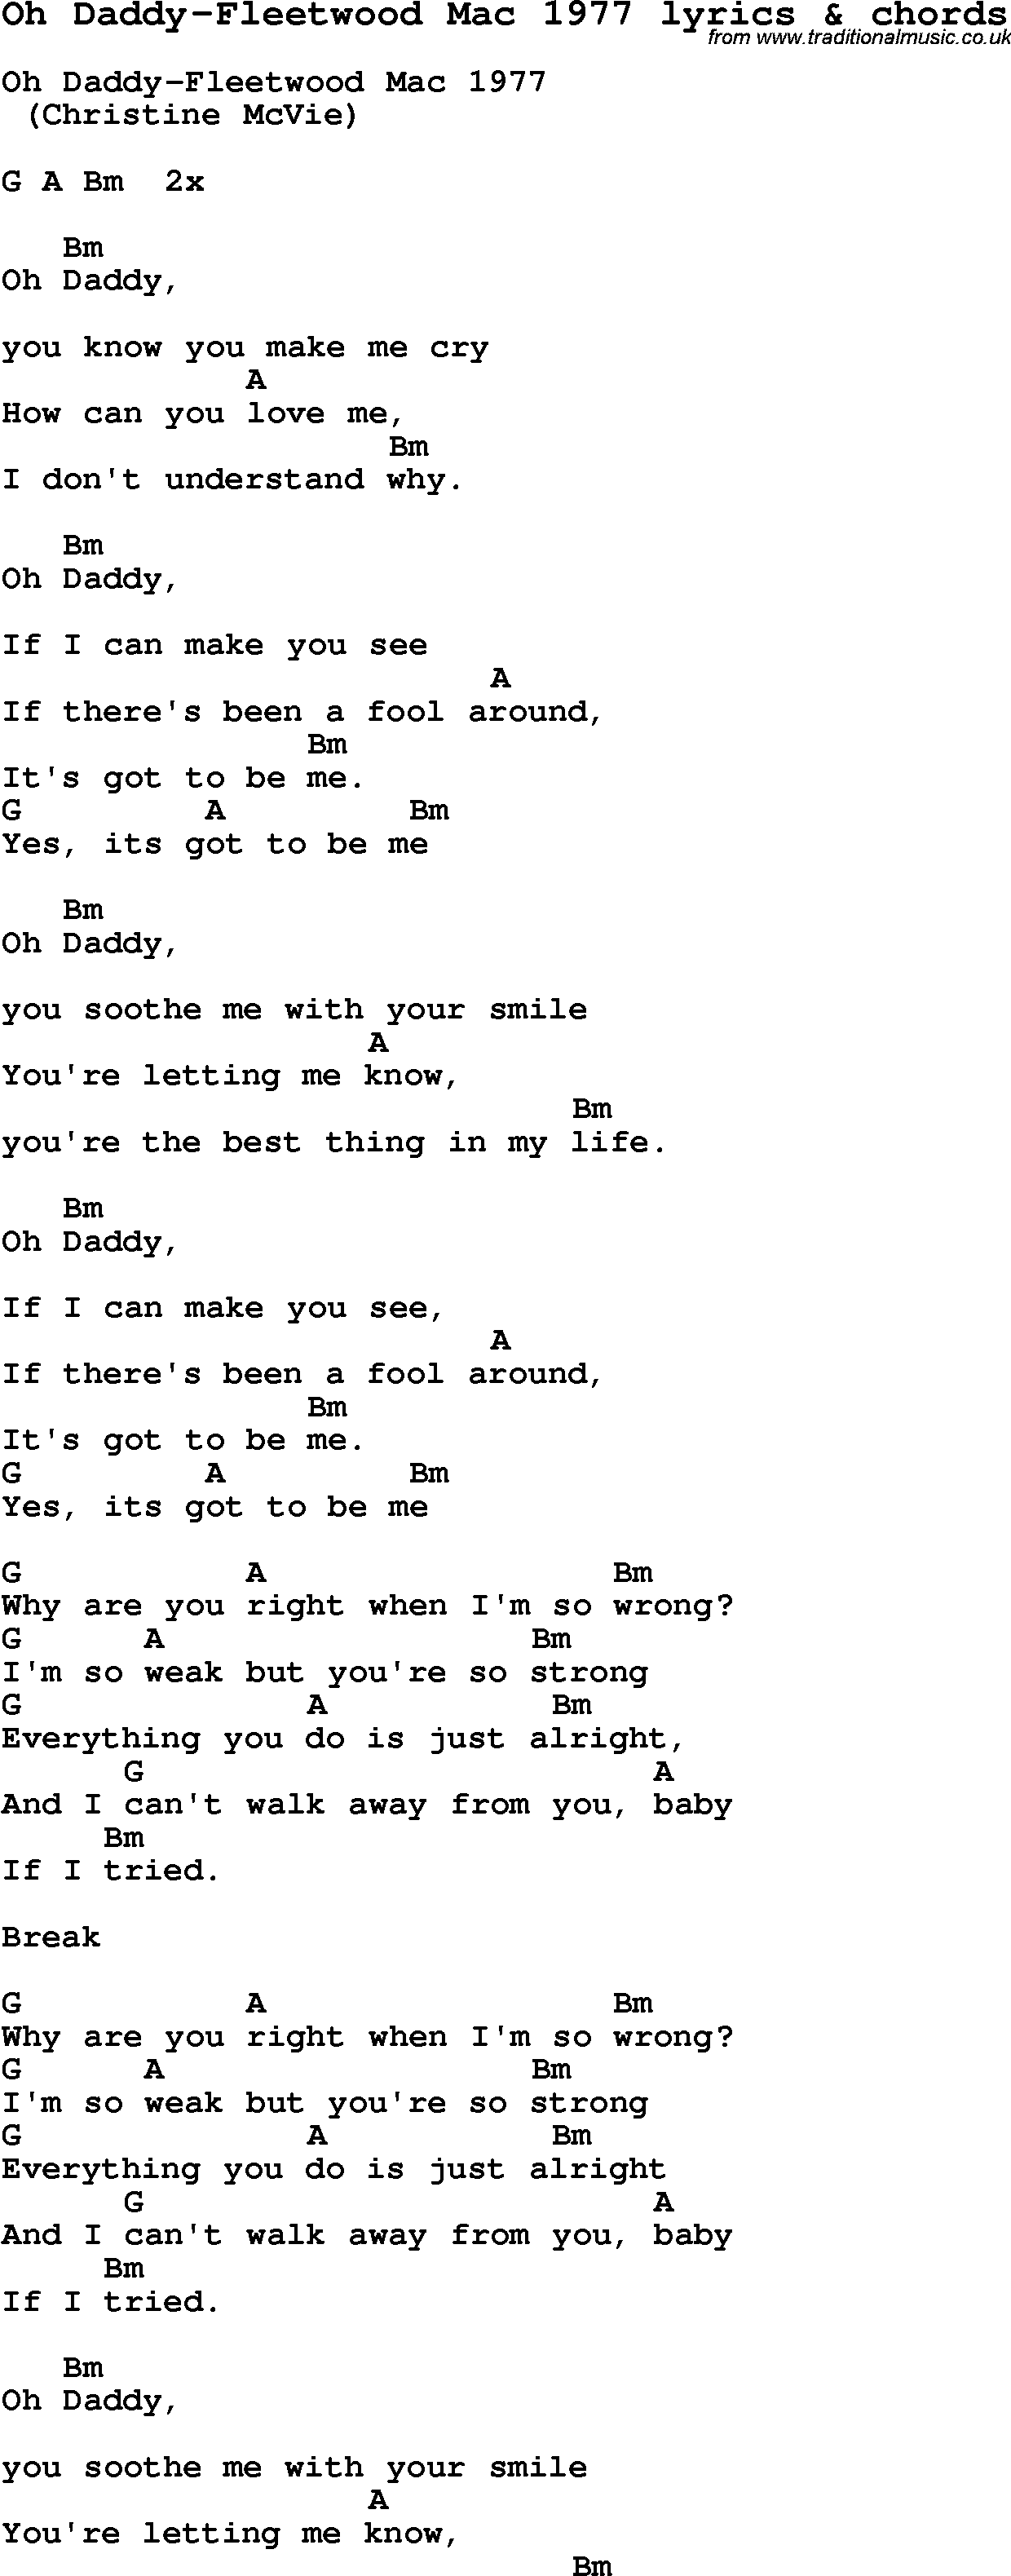 Love Song Lyrics for: Oh Daddy-Fleetwood Mac 1977 with chords for Ukulele, Guitar Banjo etc.